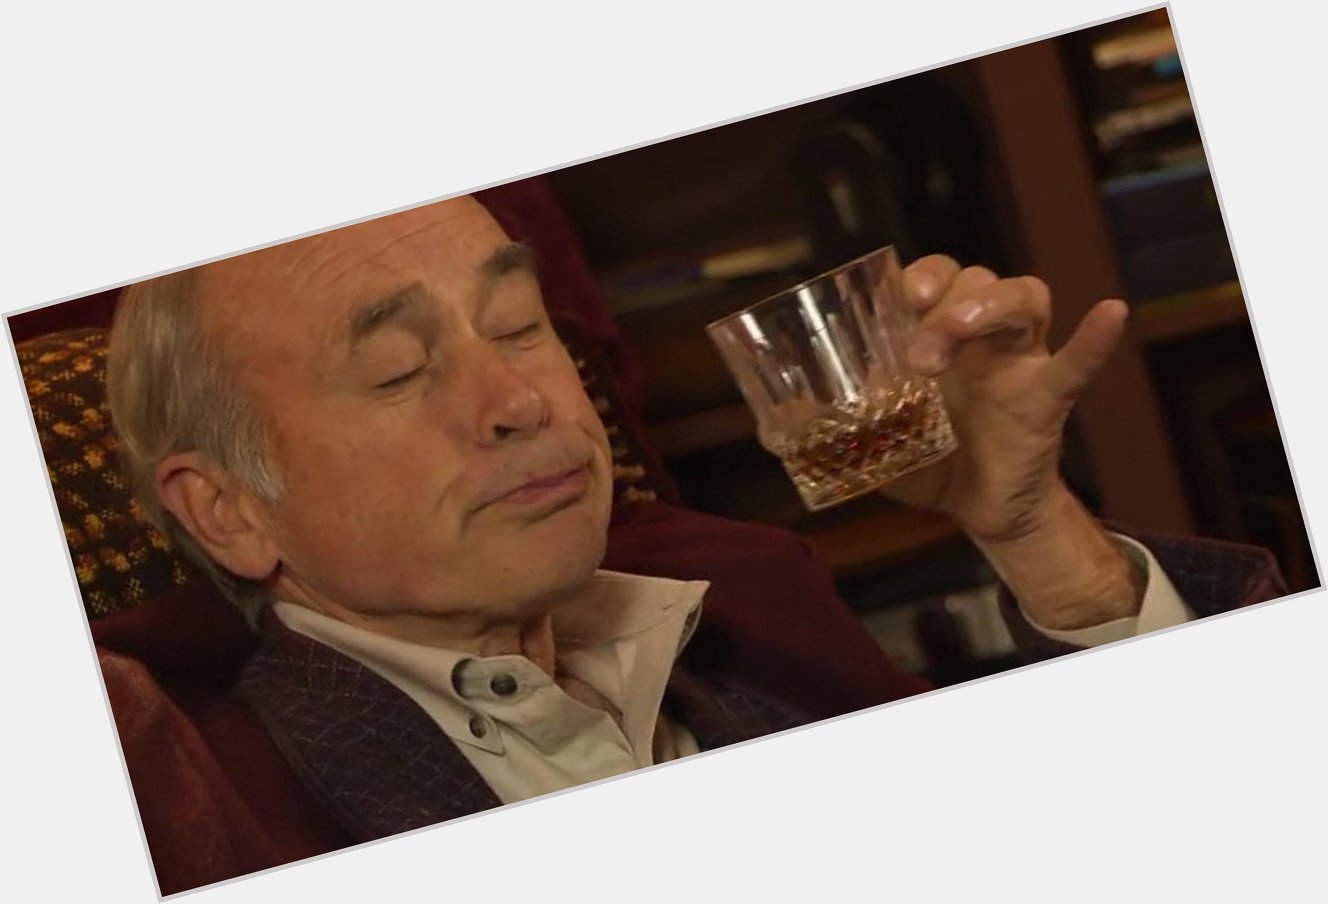 Happy birthday to the funniest actor on Trailer Park Boys, John Dunsworth (Mr. Lahey). Can\t wait to see him Friday!! 